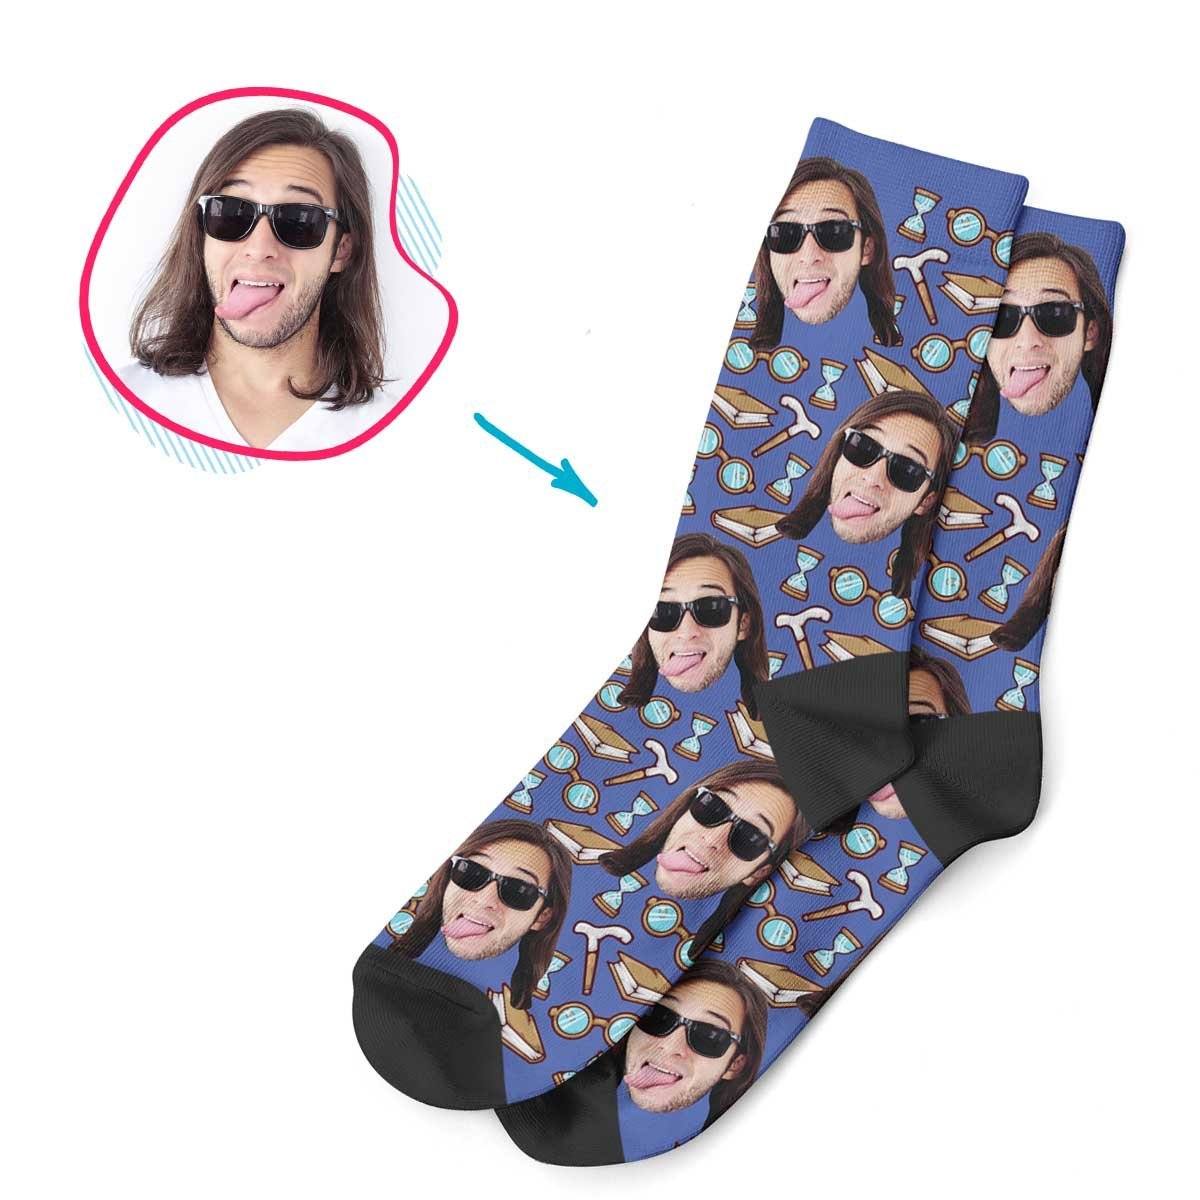 Darkblue Retirement personalized socks with photo of face printed on them